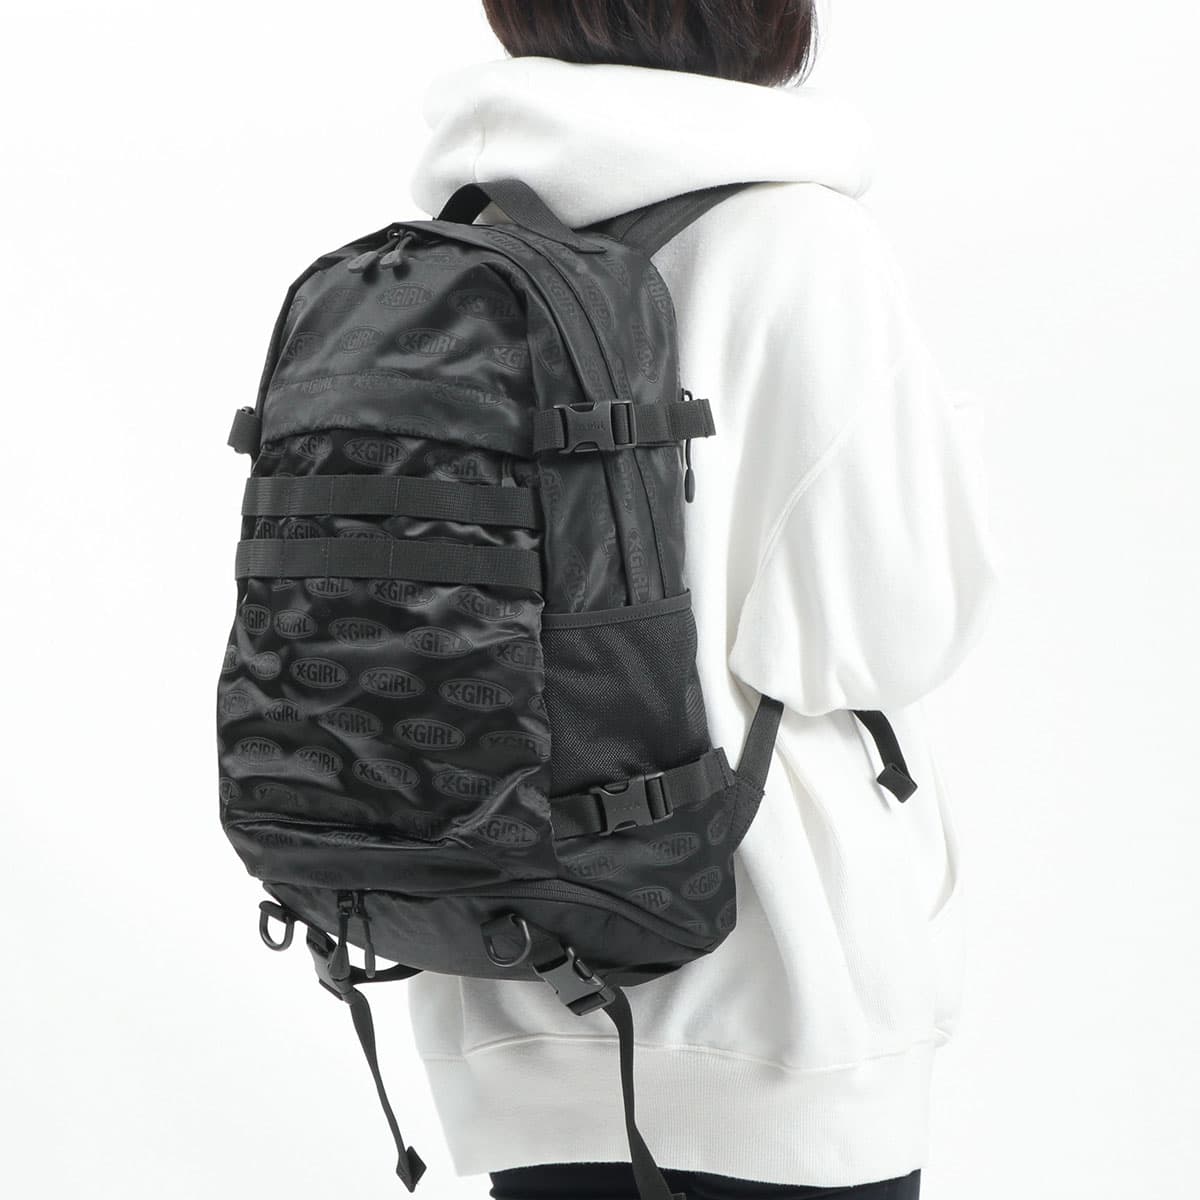 X-girl エックスガール OVAL LOGO ADVENTURE BACKPACK リュックサック